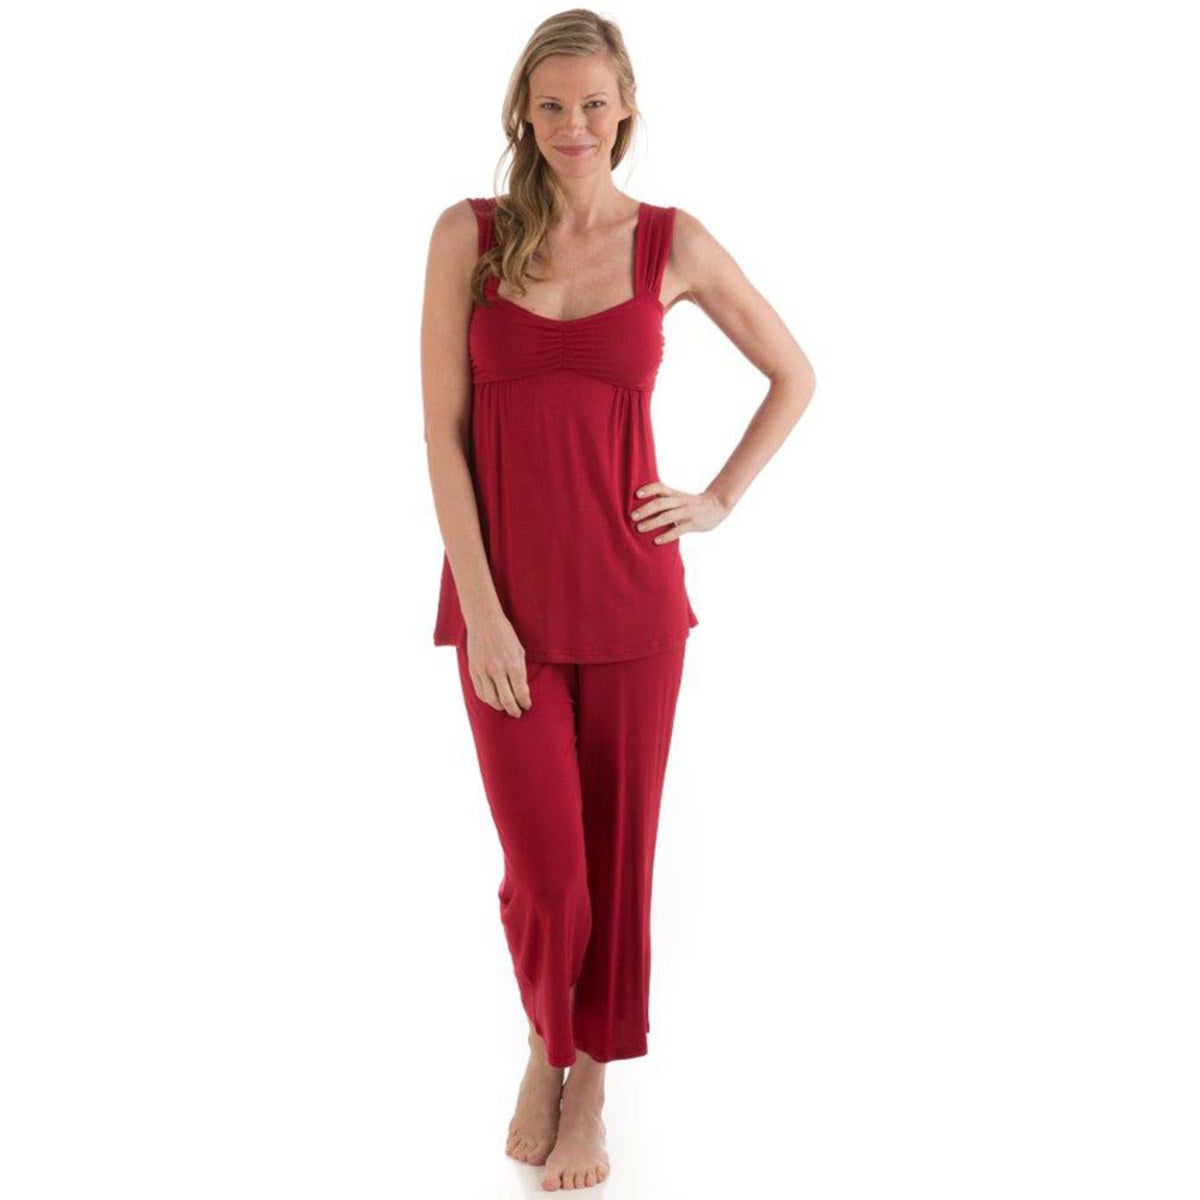 Eco-Weave Sleeveless Ruched Bodice Top & Cropped Pant Pajama Set - Cranberry - Small